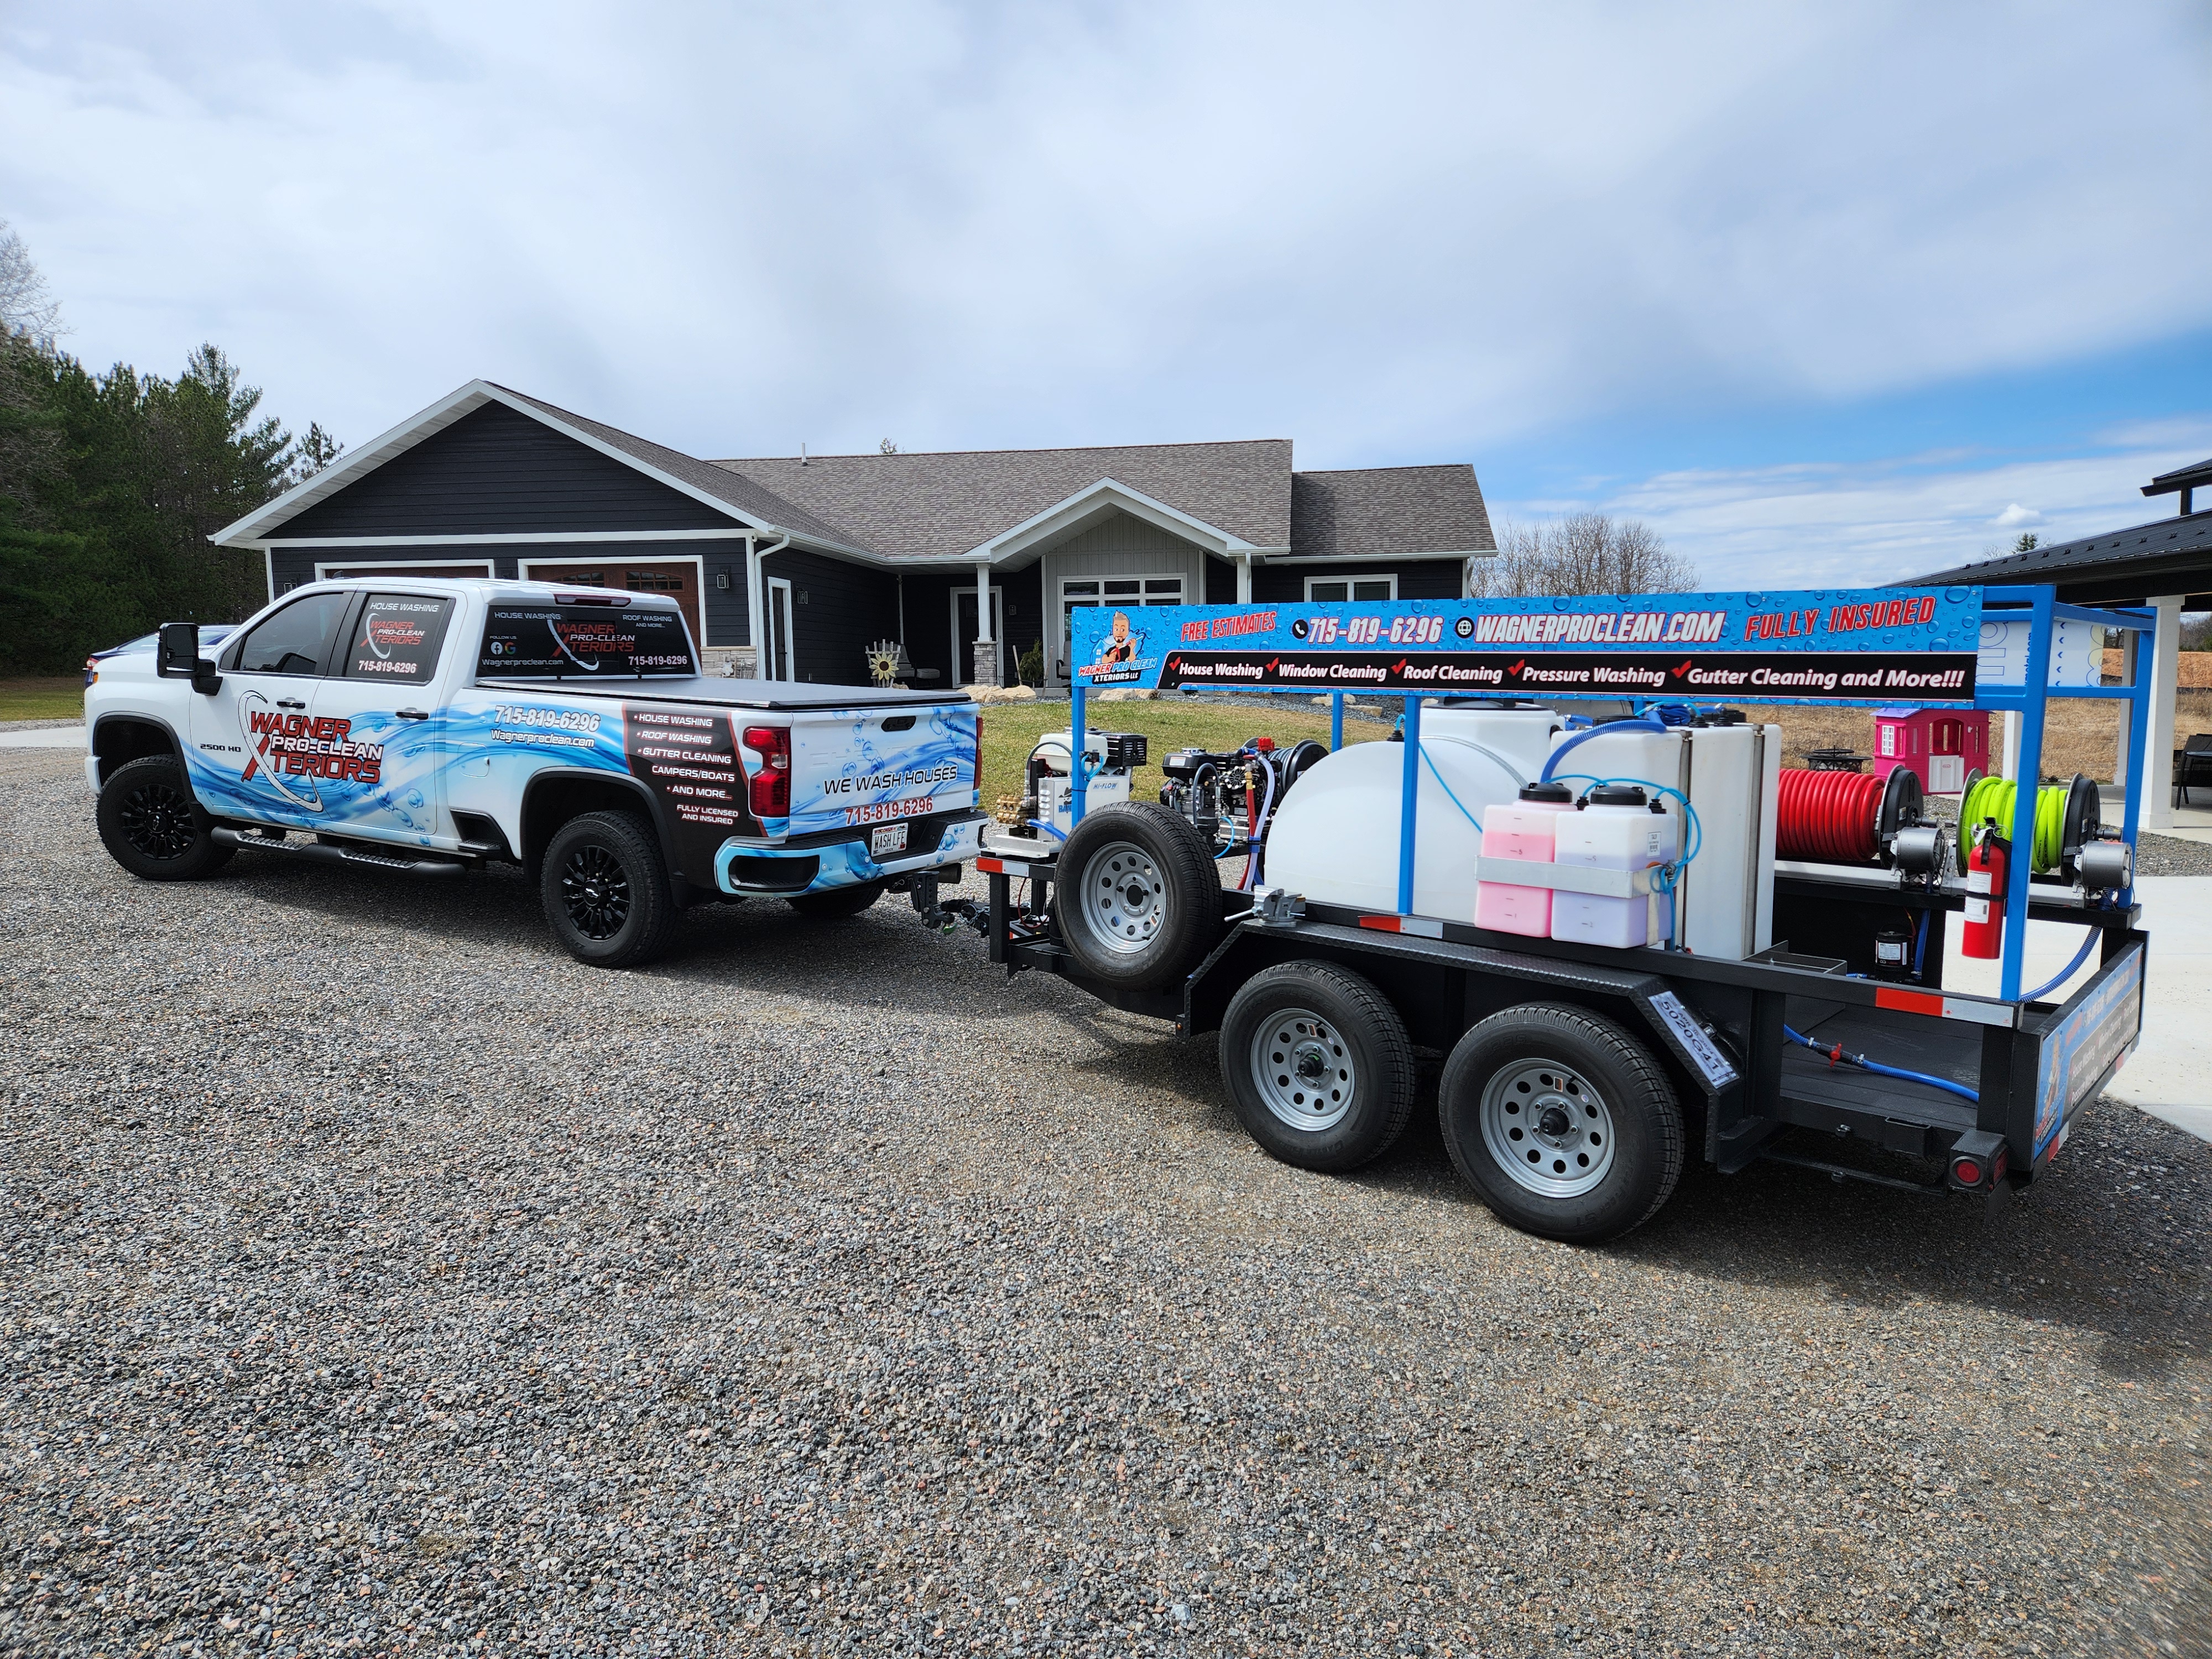 New Soft Wash and Pressure Washing Equipment to Better Serve our customers in Central Wisconsin